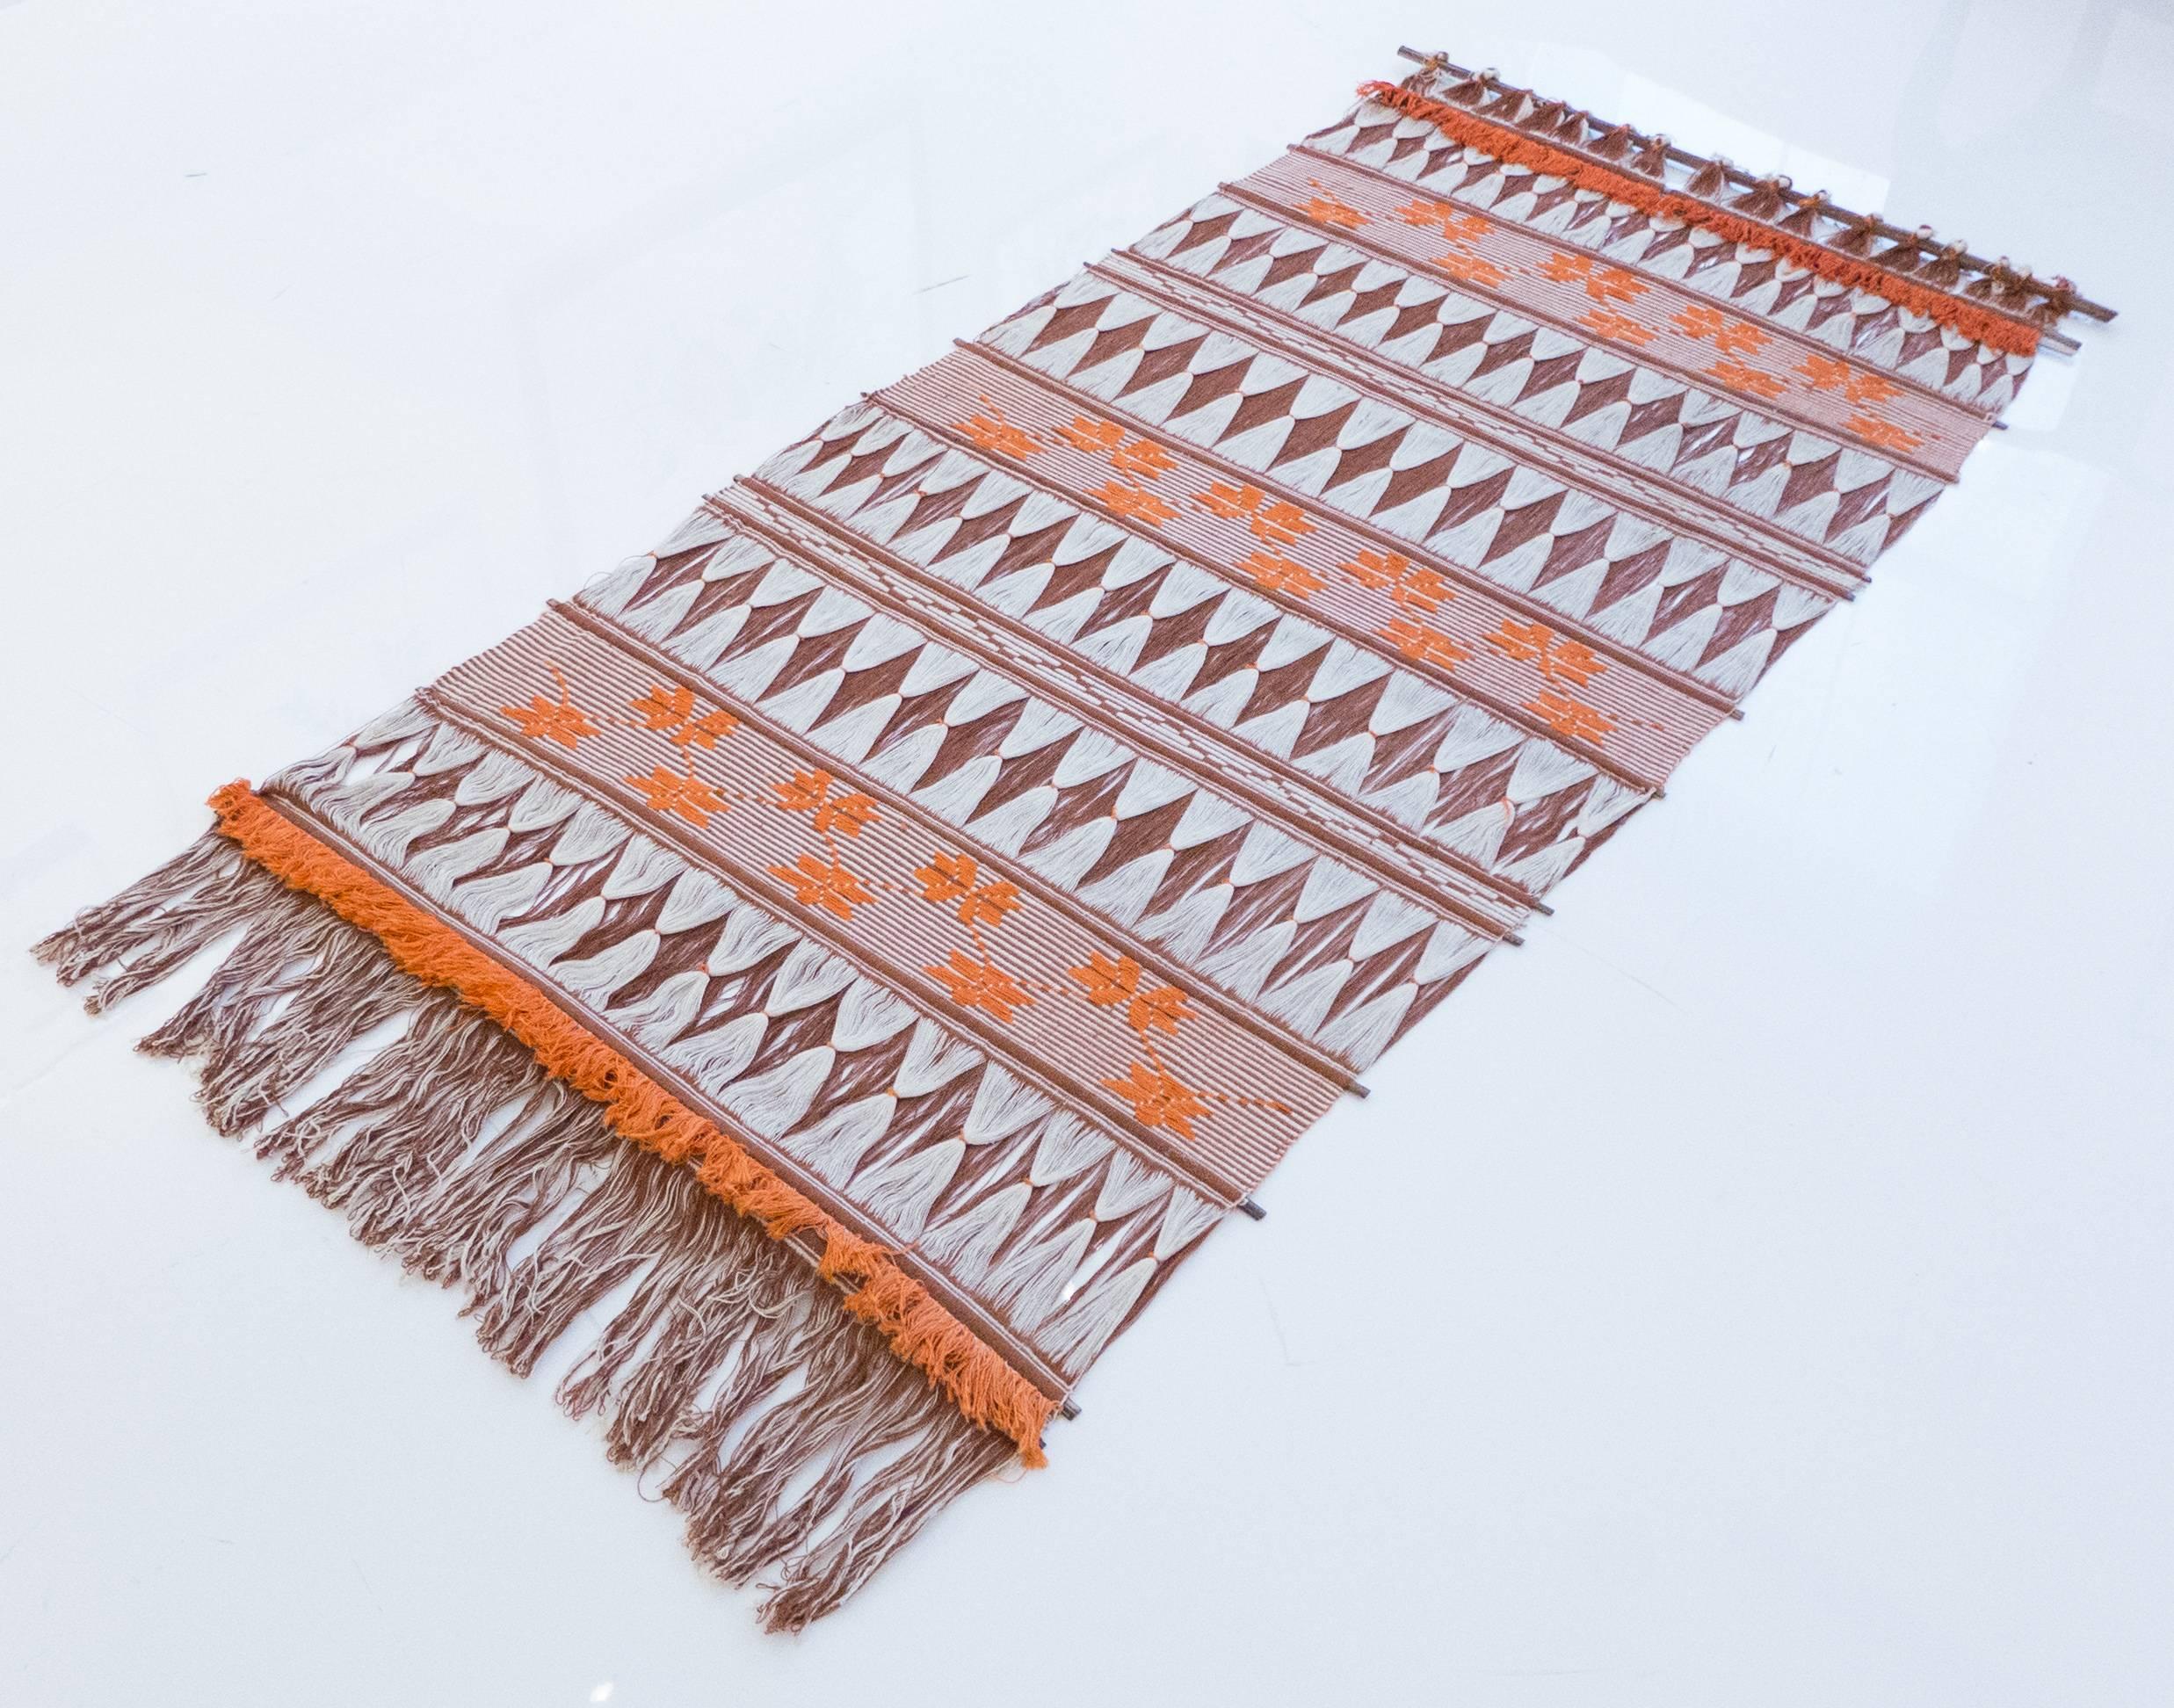 Hanging textile of woven wool with horizontal wooden slats; made in Scandinavia, circa 1960s.